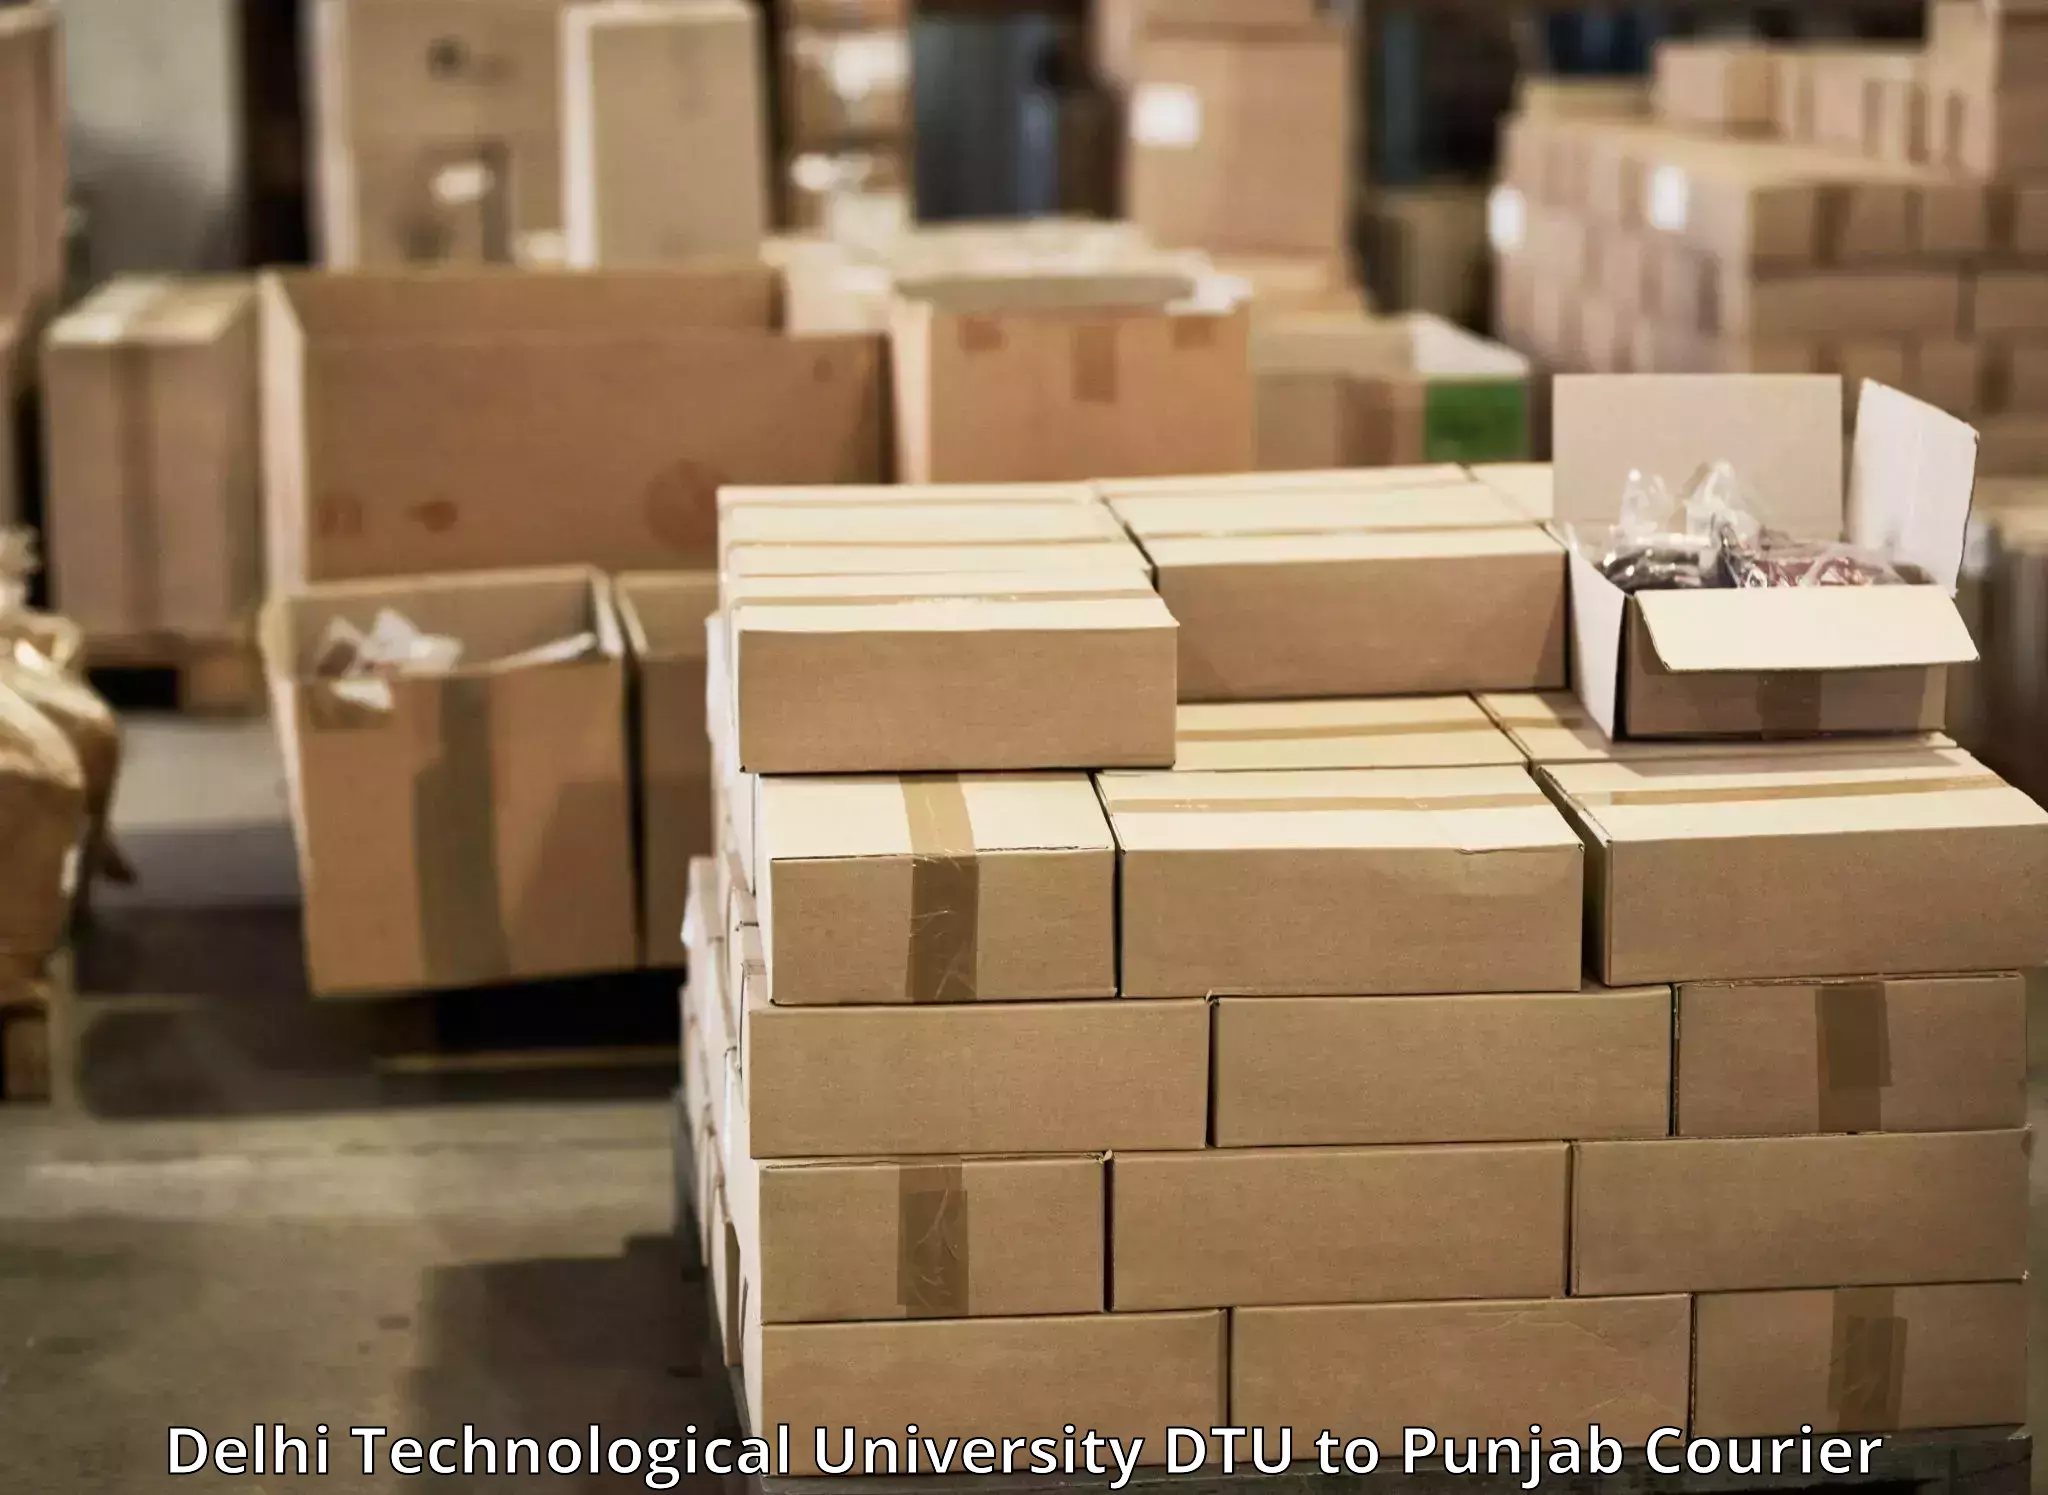 On-call courier service Delhi Technological University DTU to Begowal